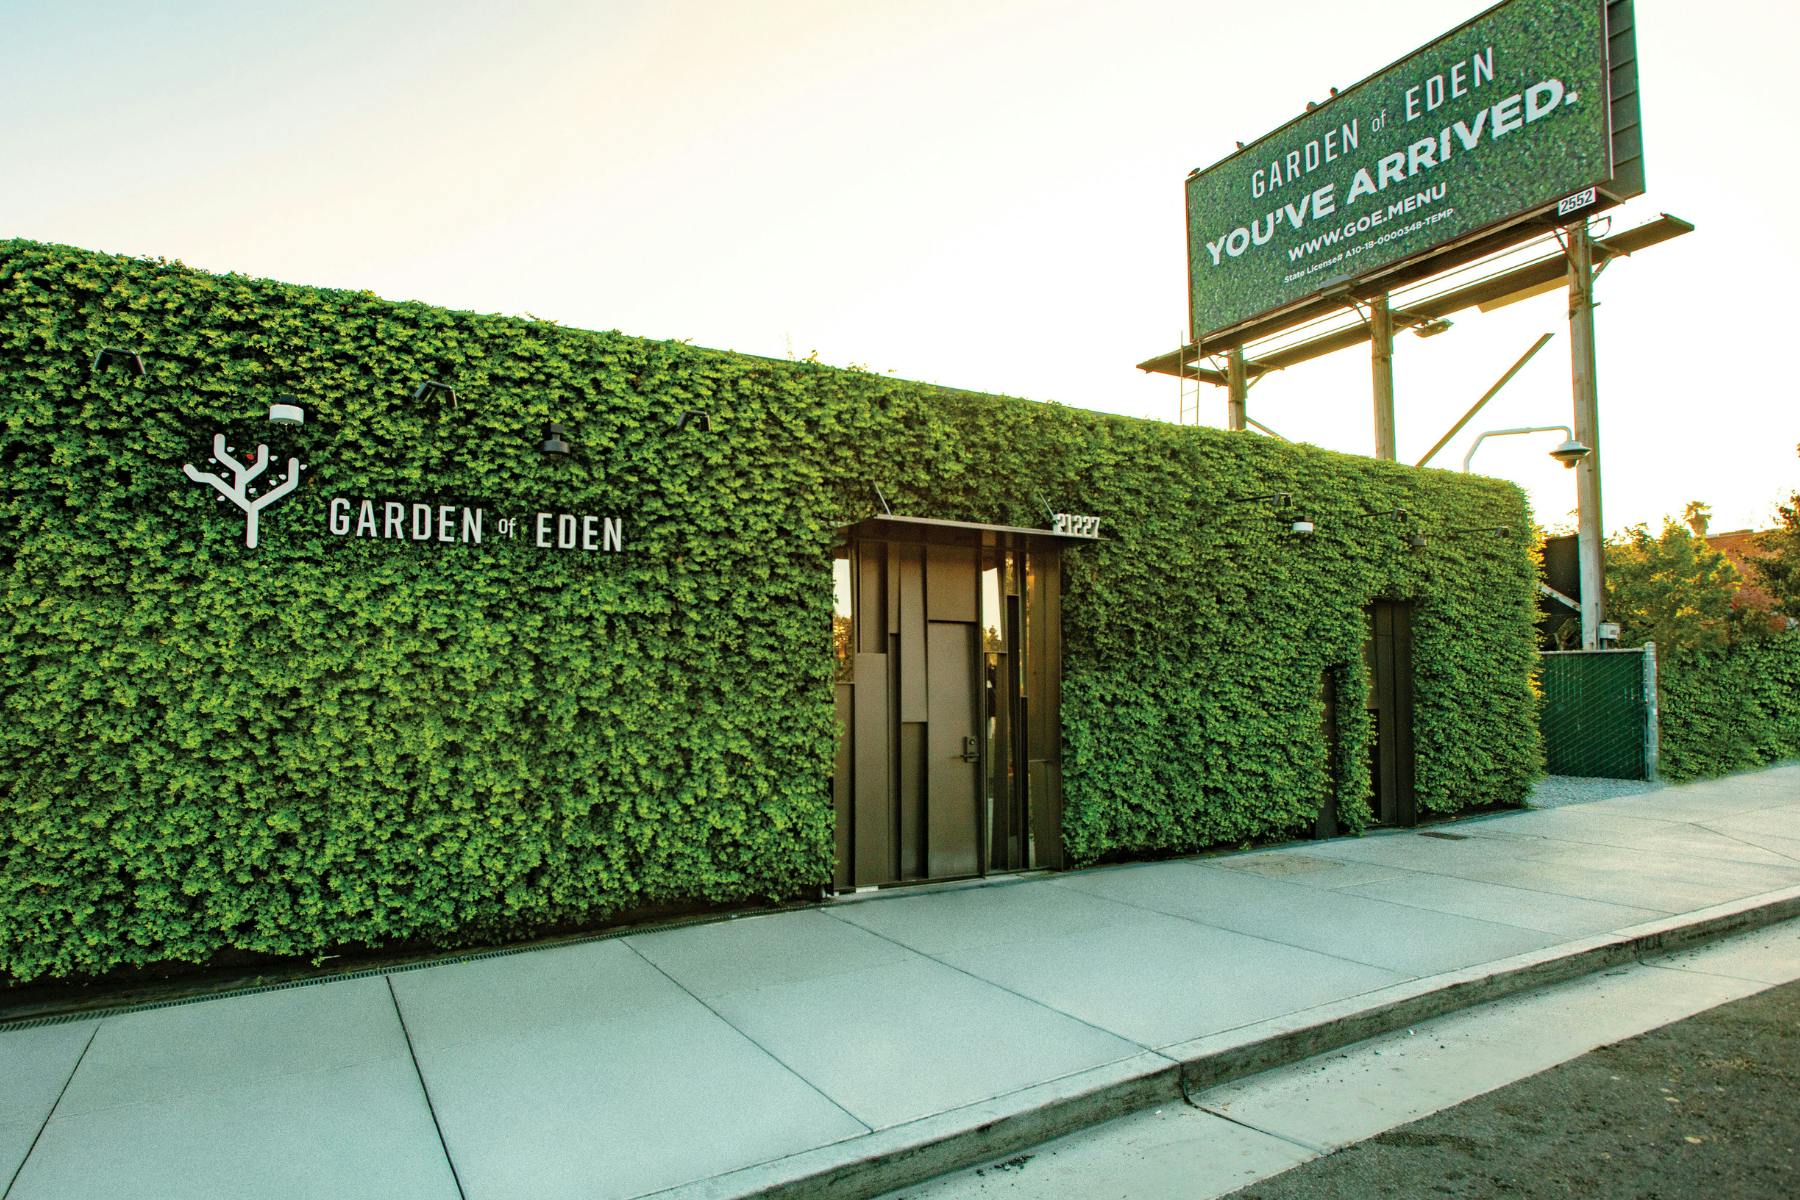 A picture shows the ivy-covered modern cannabis dispensary Garden of Eden bathed in sunset light. Above the store stands a billboard that says Garden of Eden. You've Arrived. www.GOE.menu